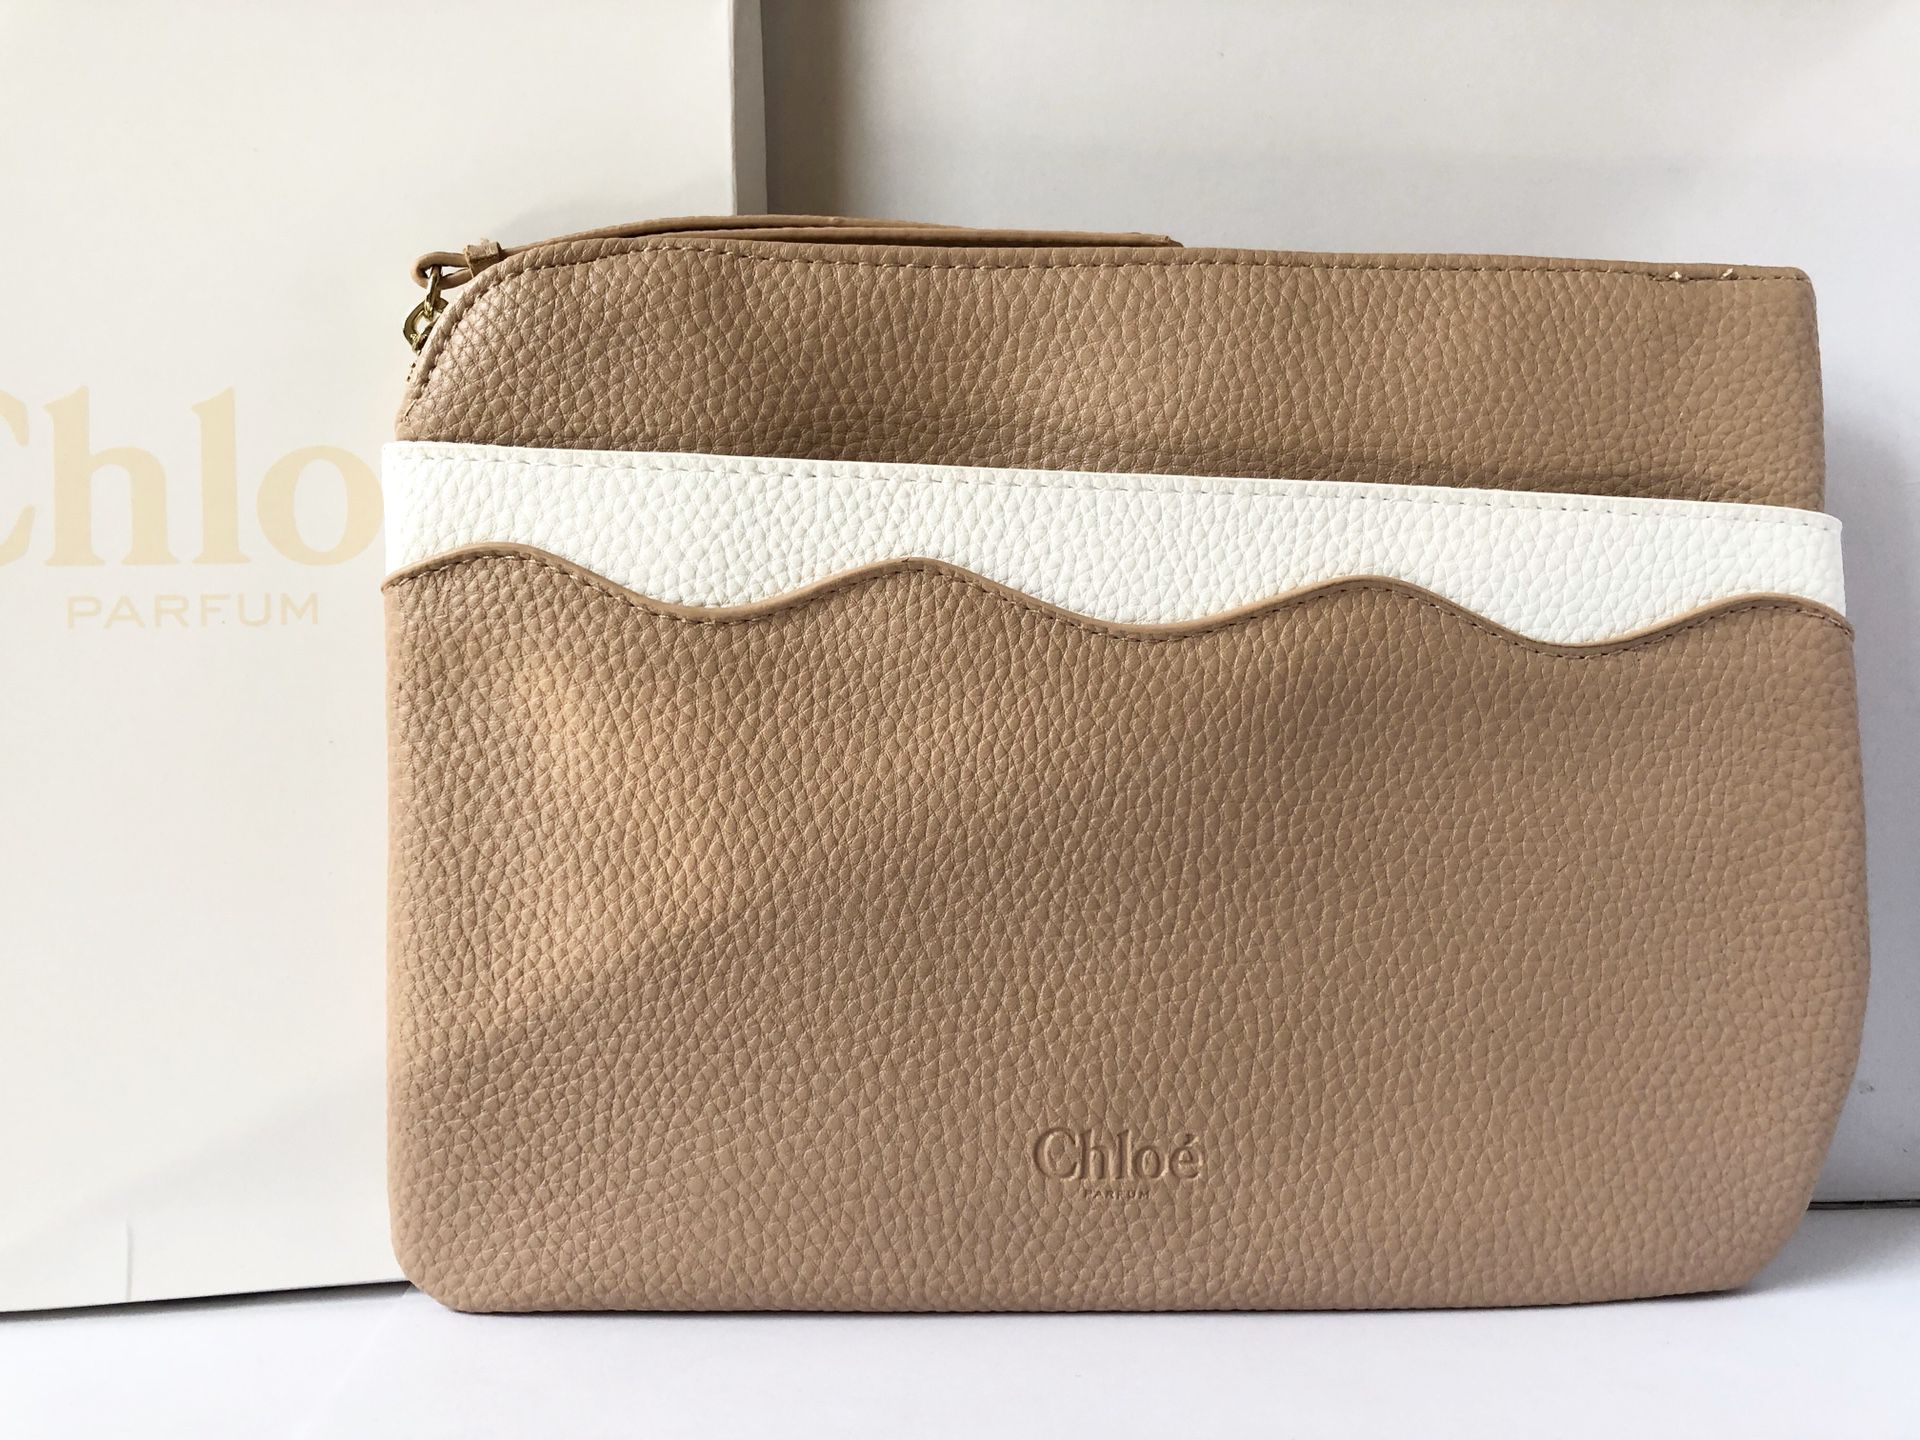 Chloe large pouch